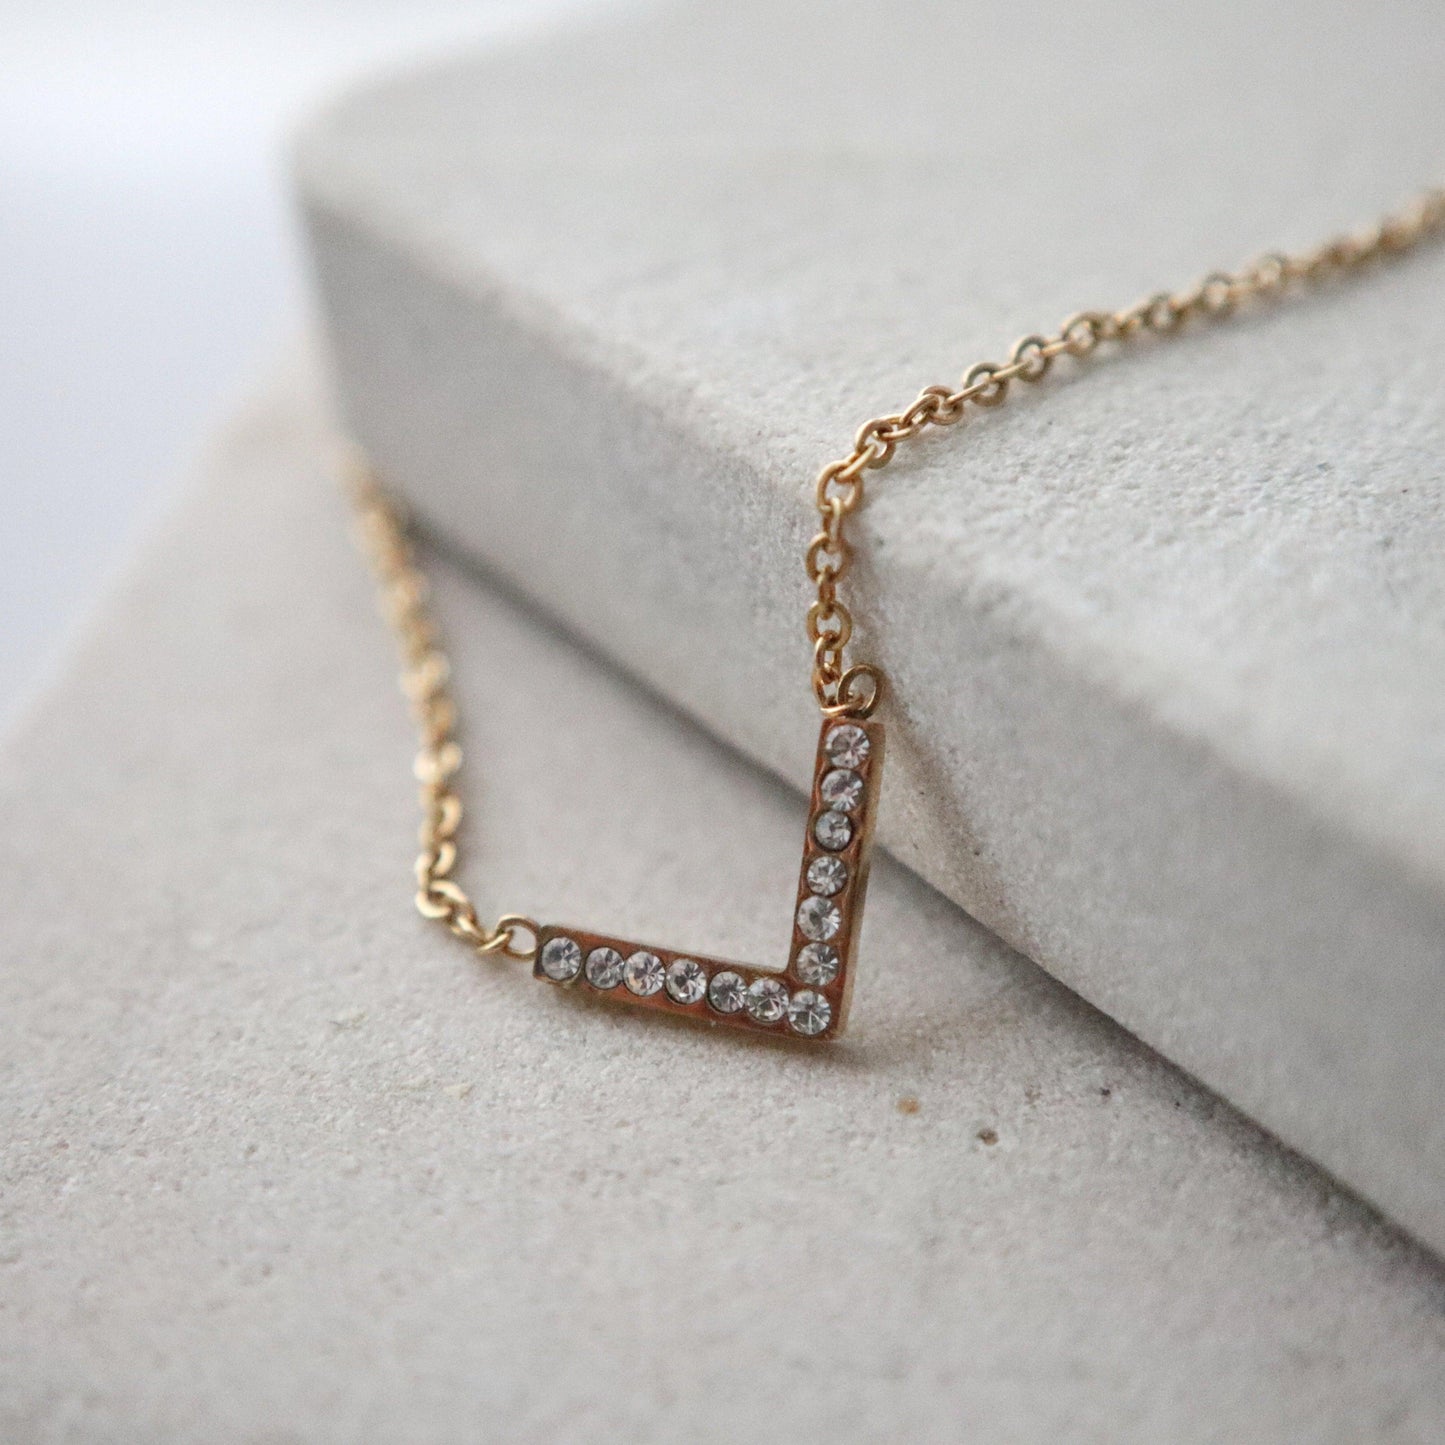 V Necklace - JESSA JEWELRY | GOLD JEWELRY; dainty, affordable gold everyday jewelry. Tarnish free, water-resistant, hypoallergenic. Jewelry for everyday wear